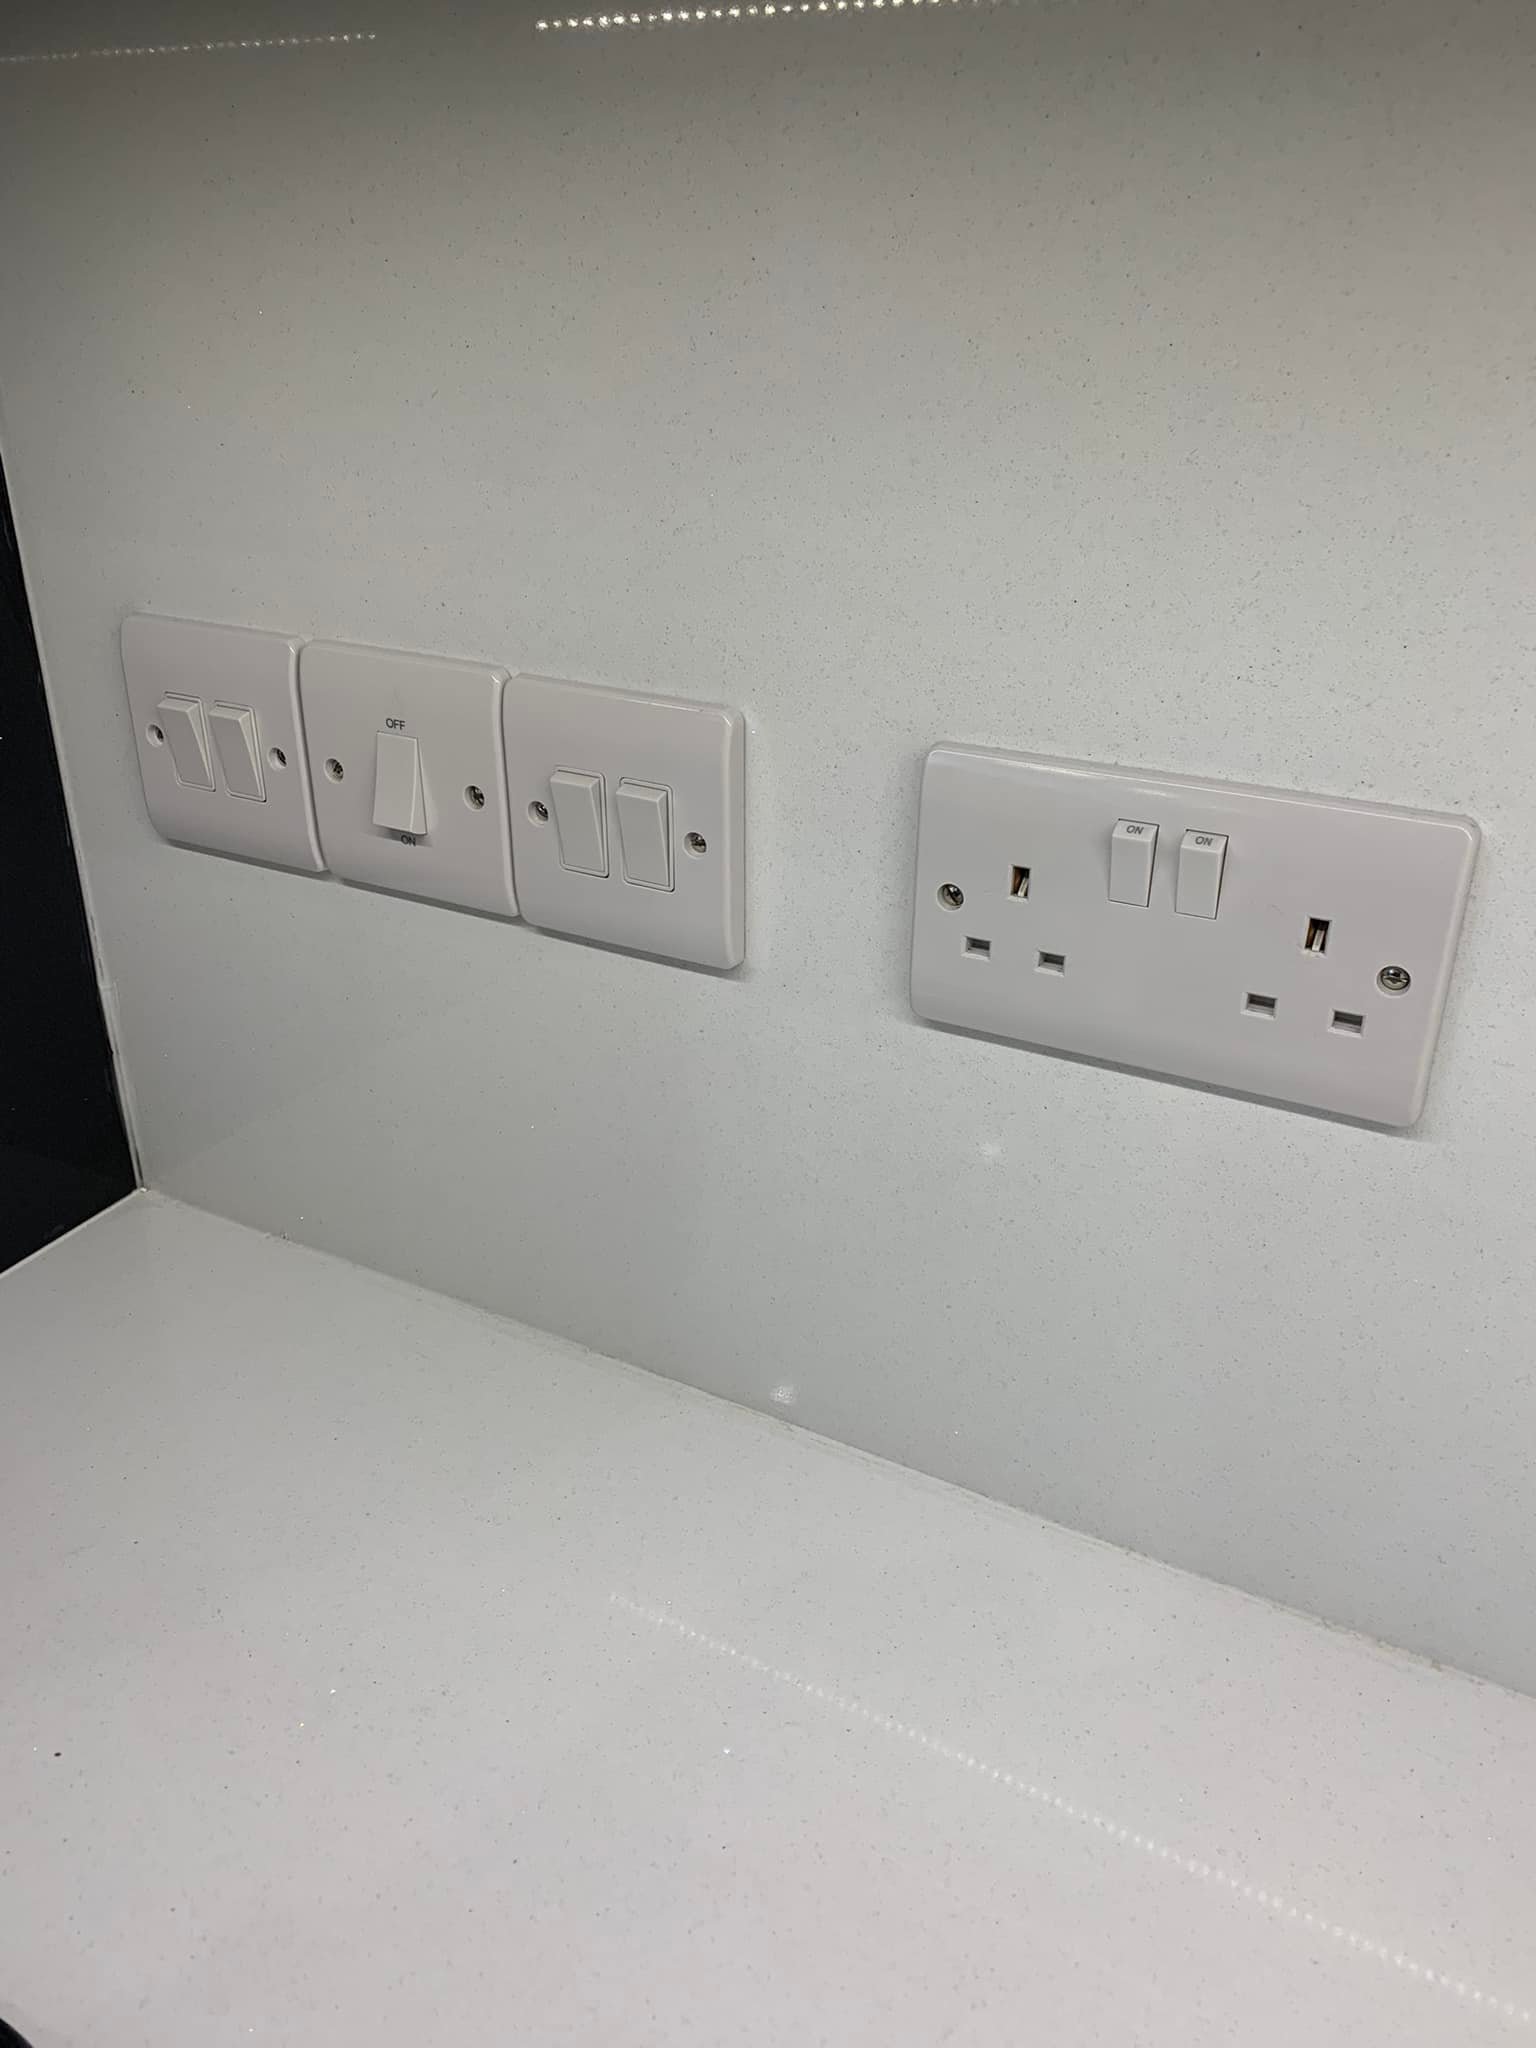 Electrical sockets mounted into kitchen wall